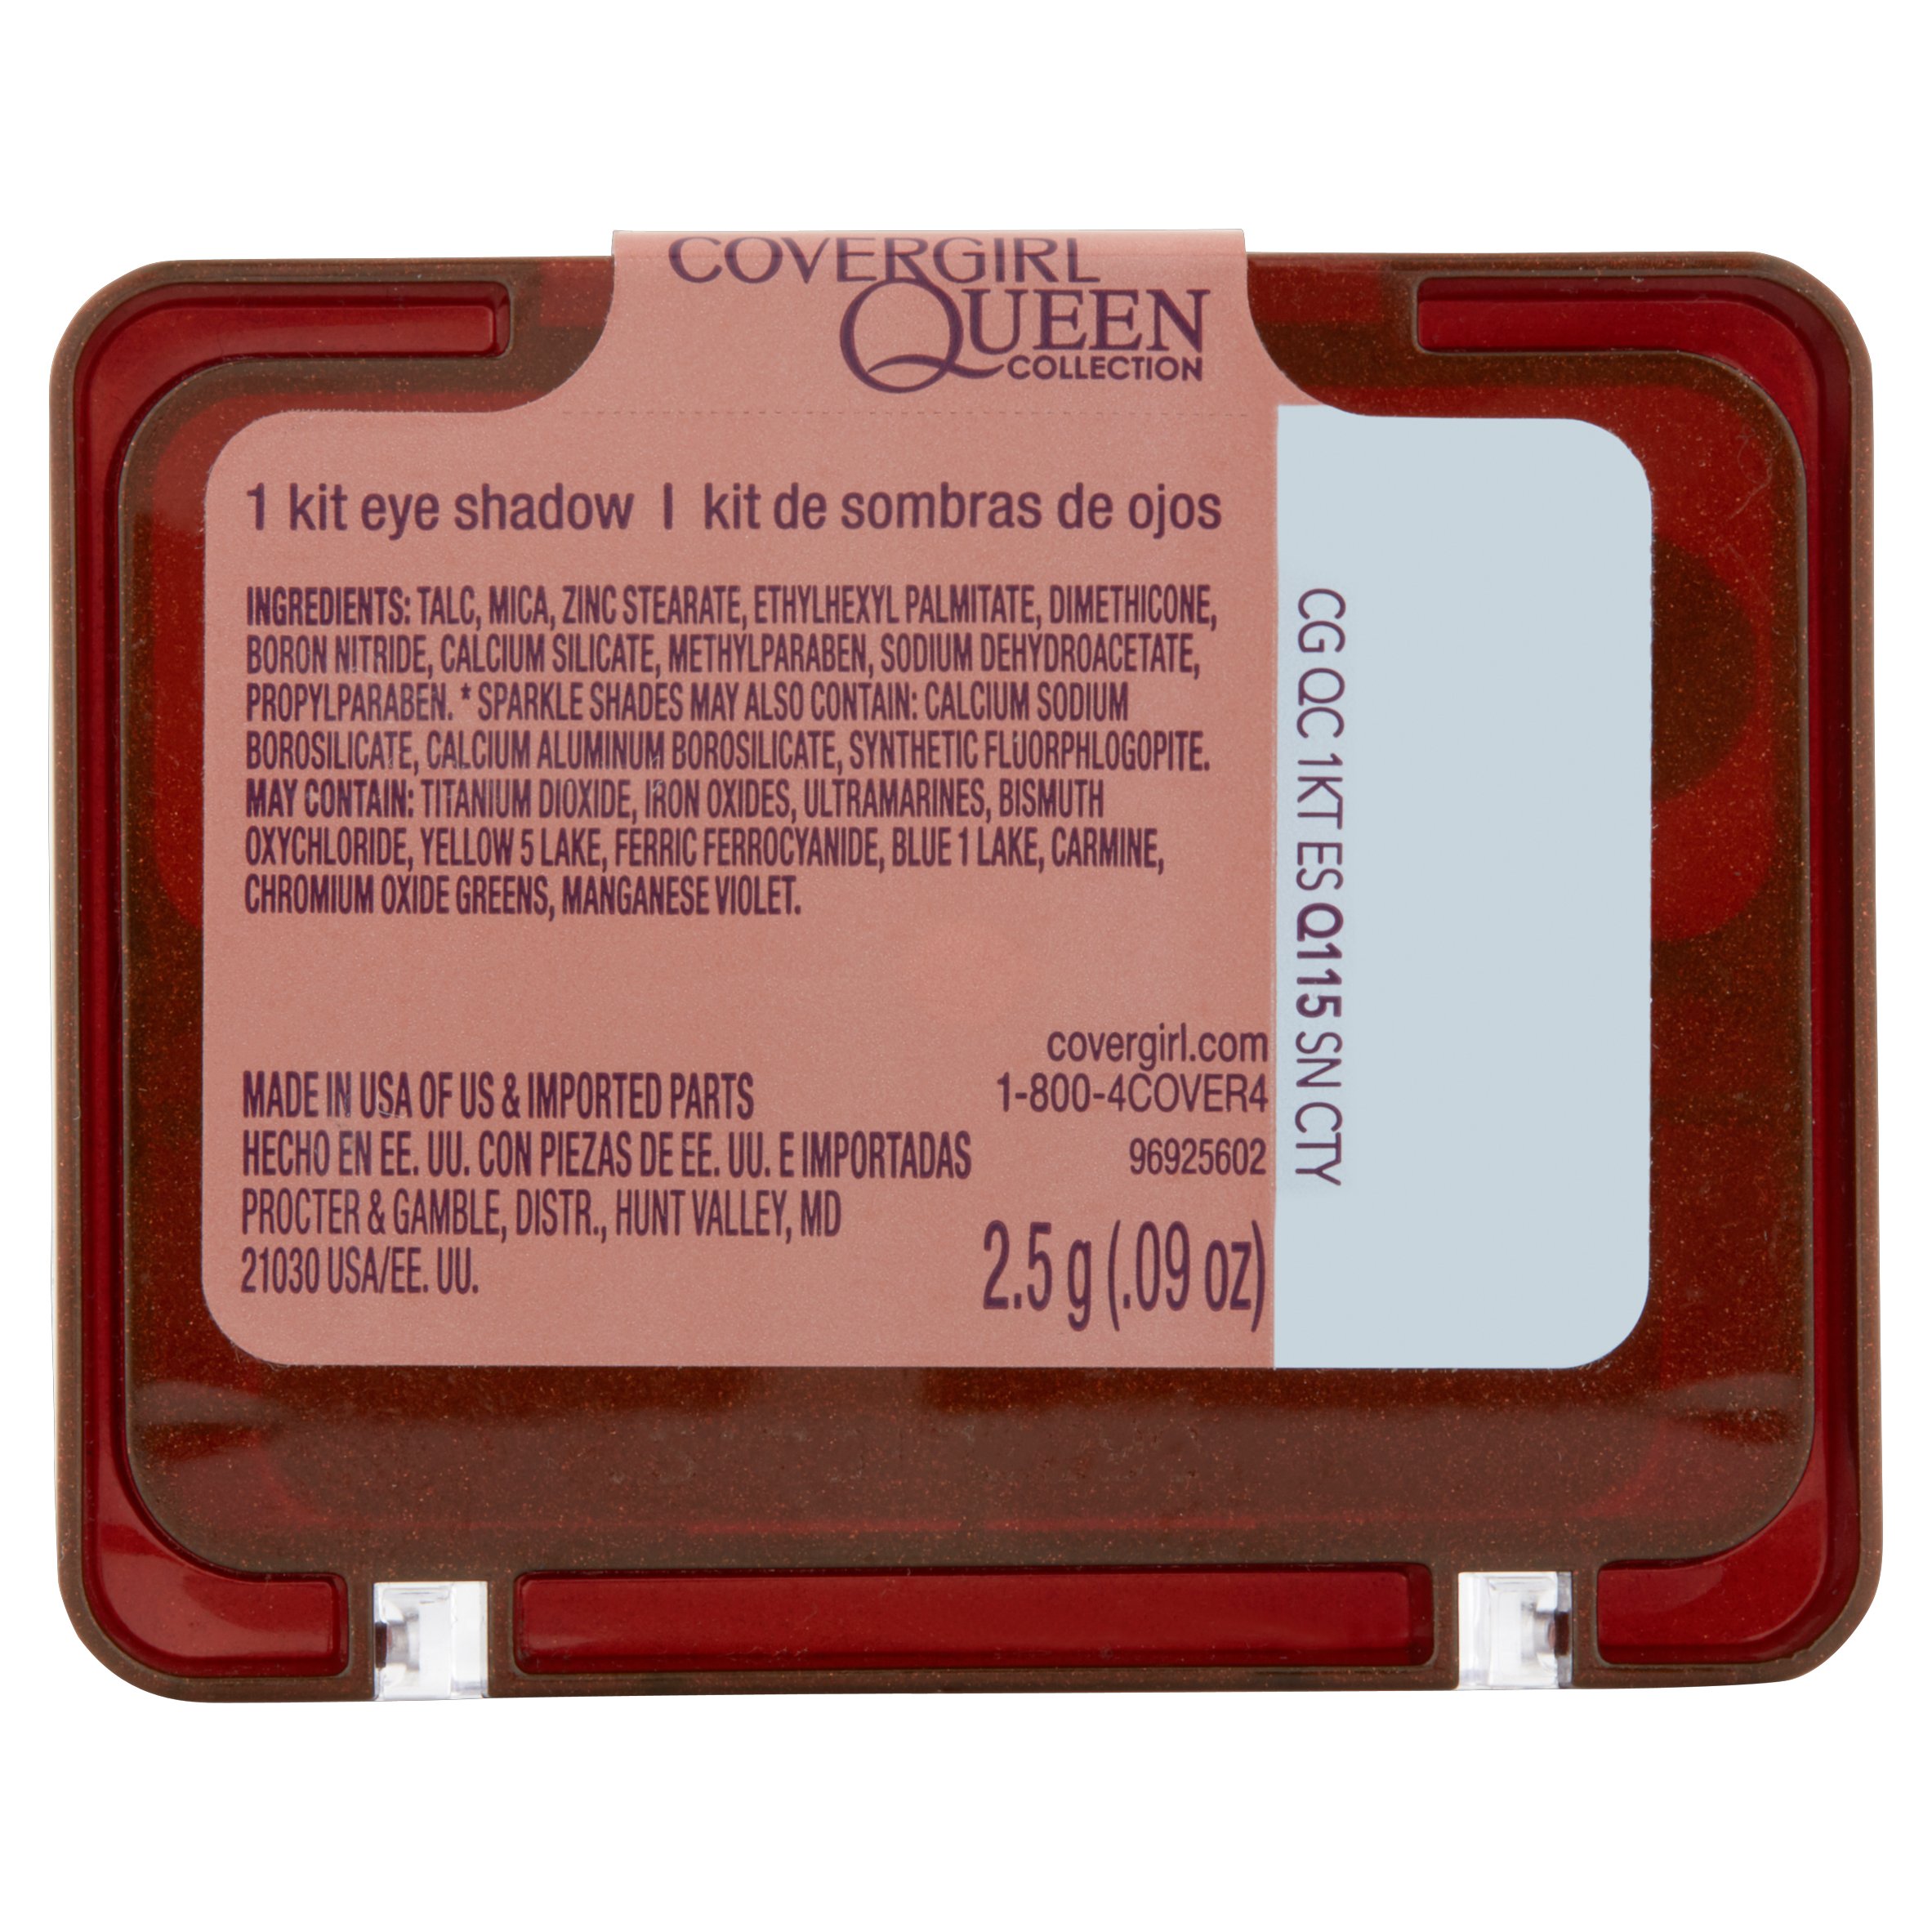 COVERGIRL Queen Collection Eye Shadow Kit, Q115 Sun City - image 3 of 4